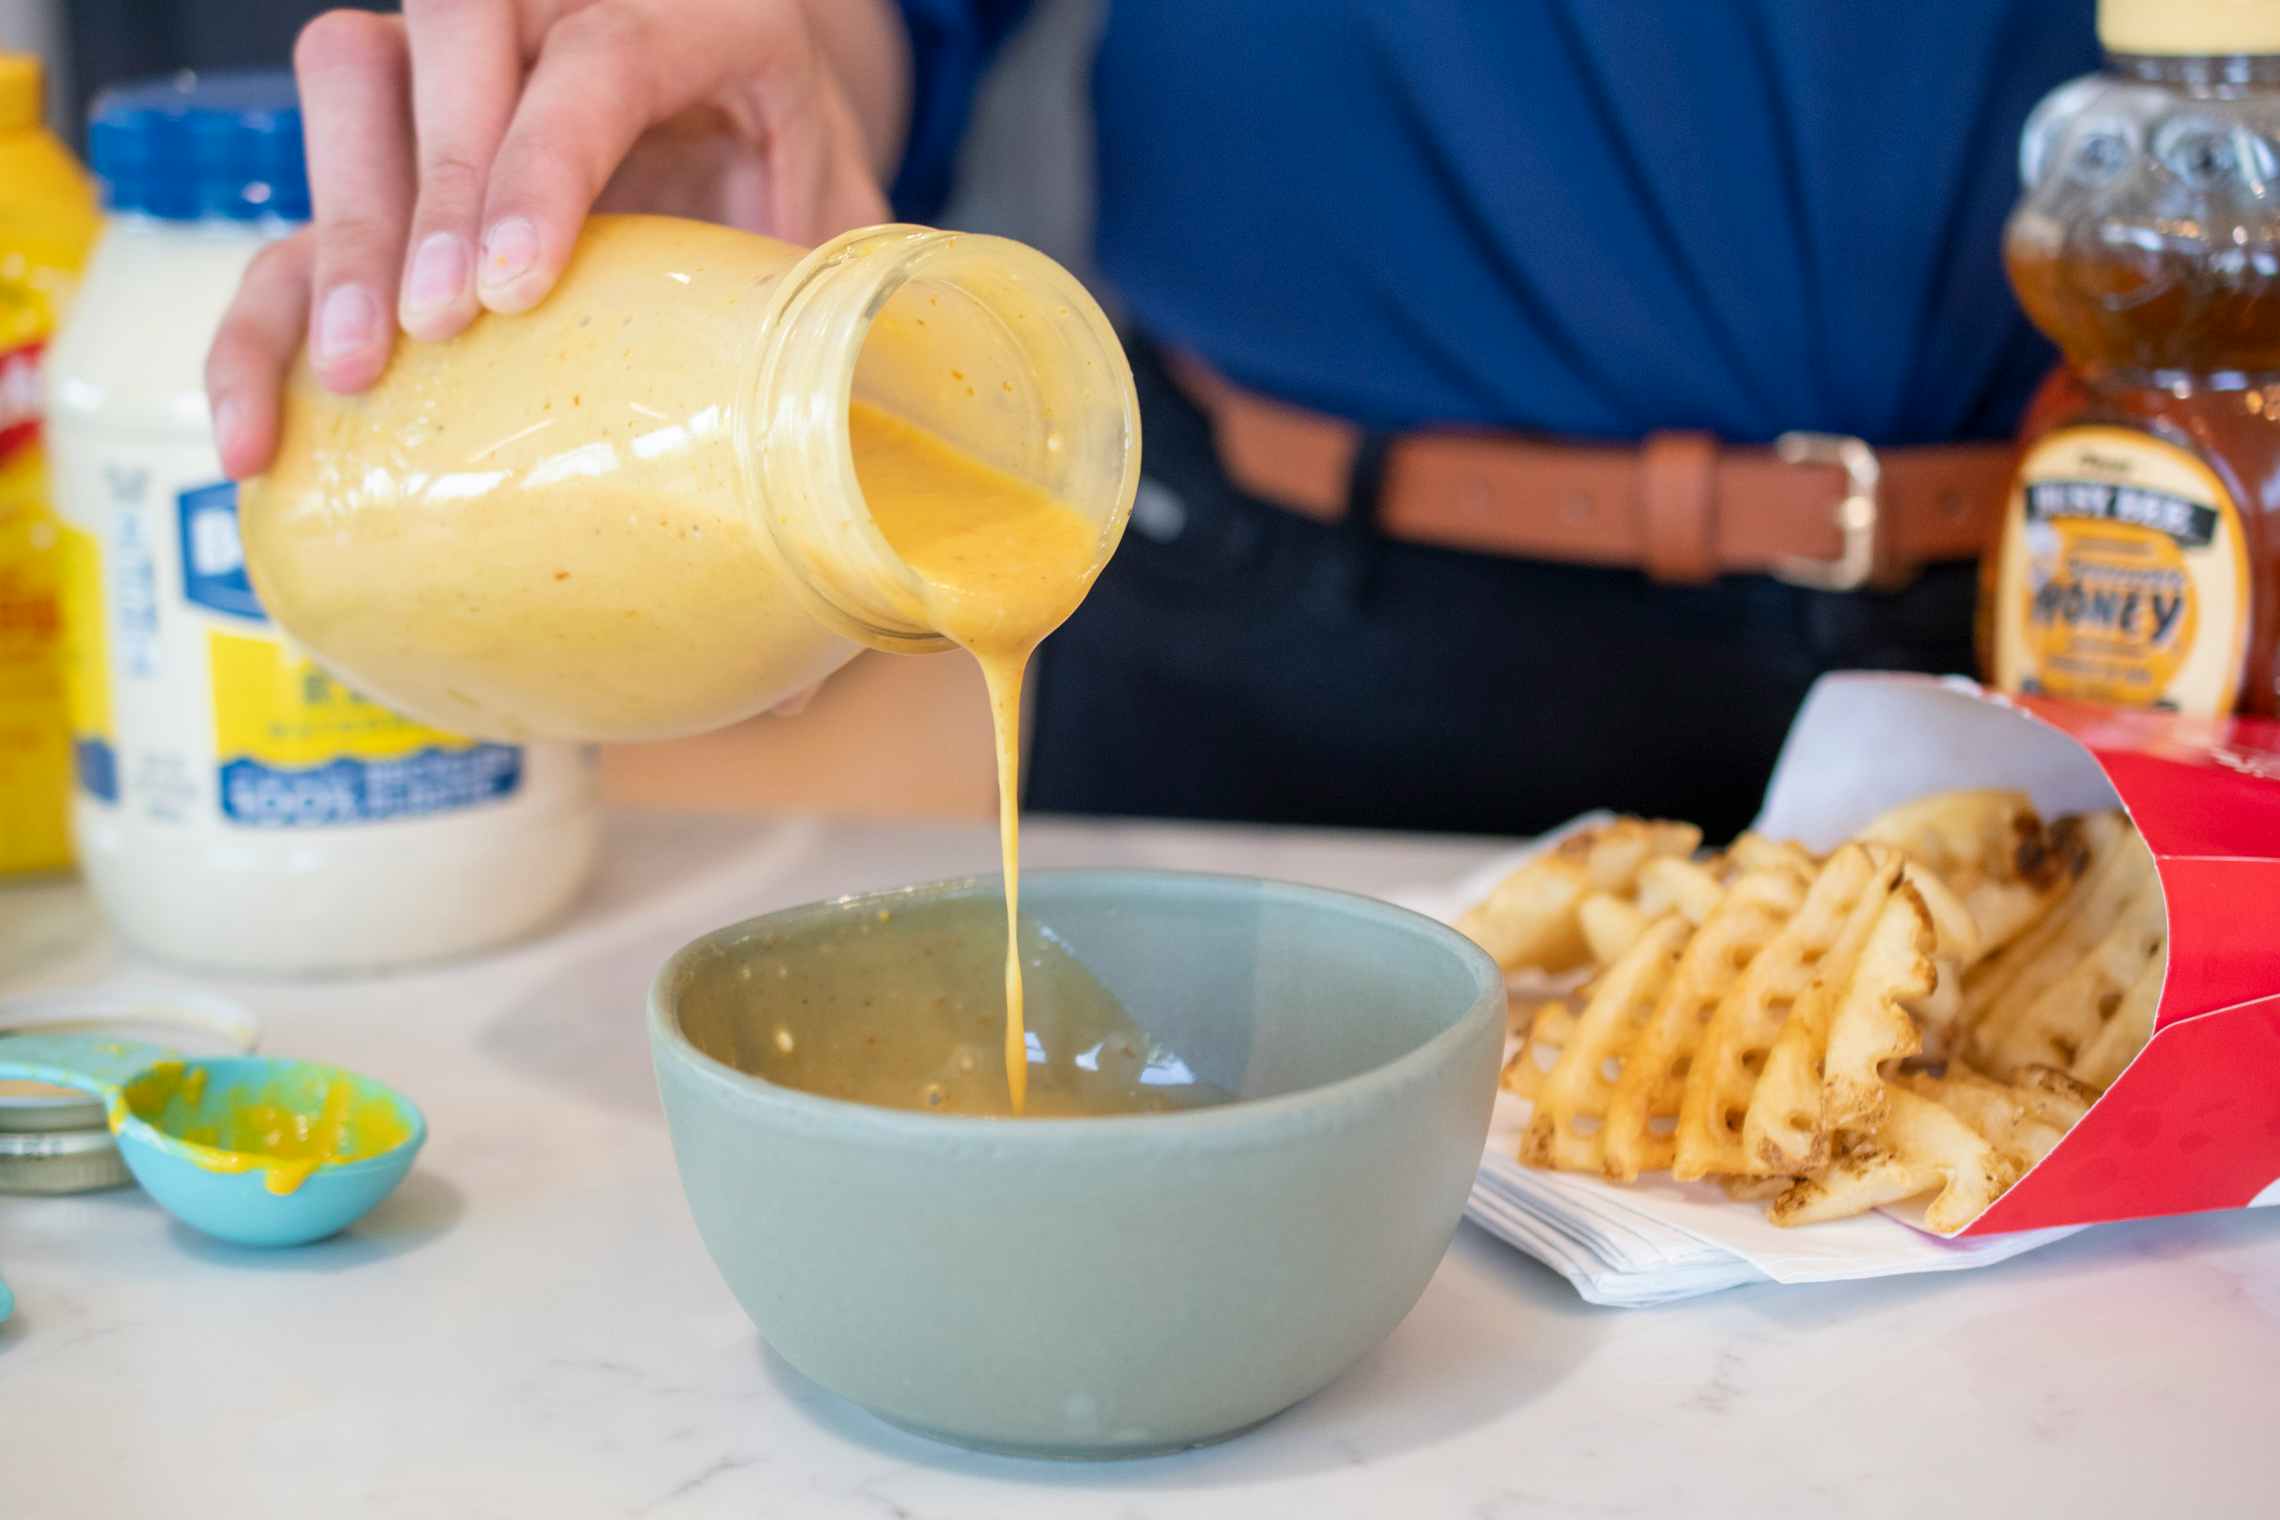 Homemade chick-fil-a sauce being poured from a glass bottle into a bowl on a table next to Chick-fil-A waffle fries and sauce ingredients...